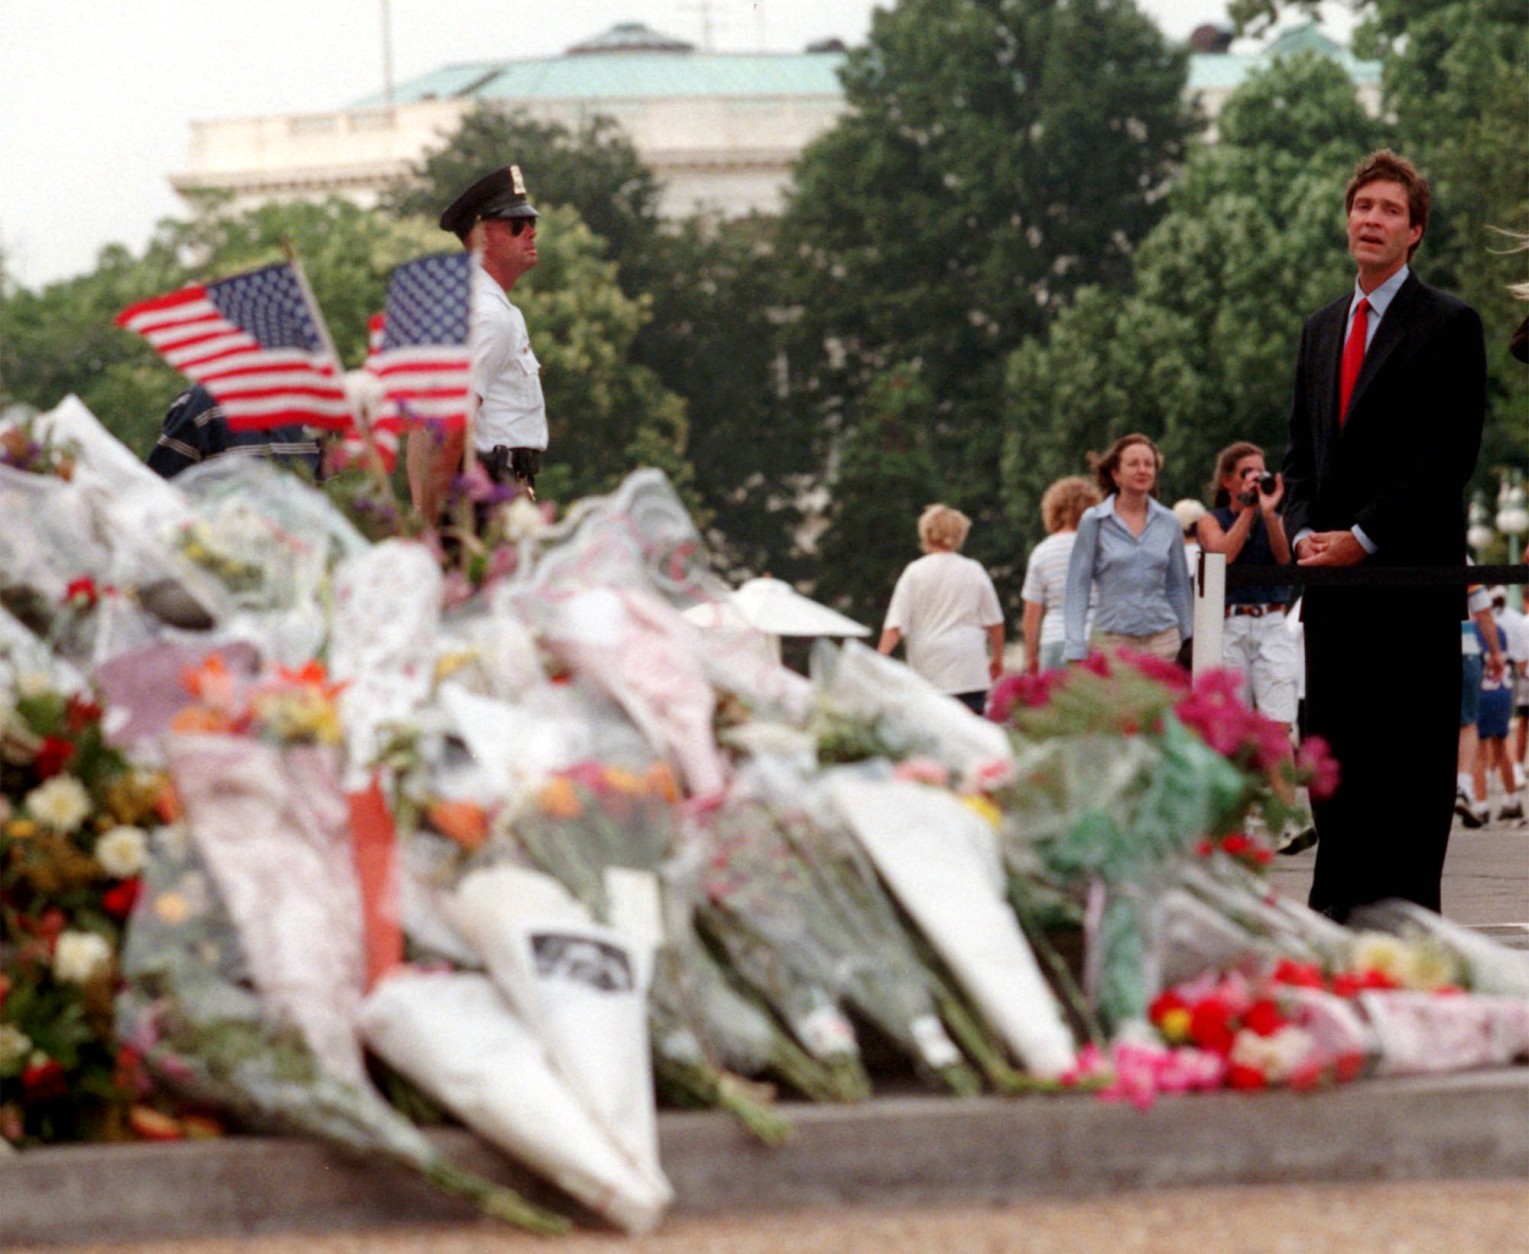 On this date in 1998, a gunman burst into the U.S. Capitol, killing two police officers before being shot and captured. In this image, Sen. Bill Frist, R-Tenn. pauses at flowers on the steps of the Capitol on July 27, 1998. Frist, a heart surgeon, is credited with saving the suspect, Russell Eugene Weston Jr.'s life. (AP Photo/Khue Bui)